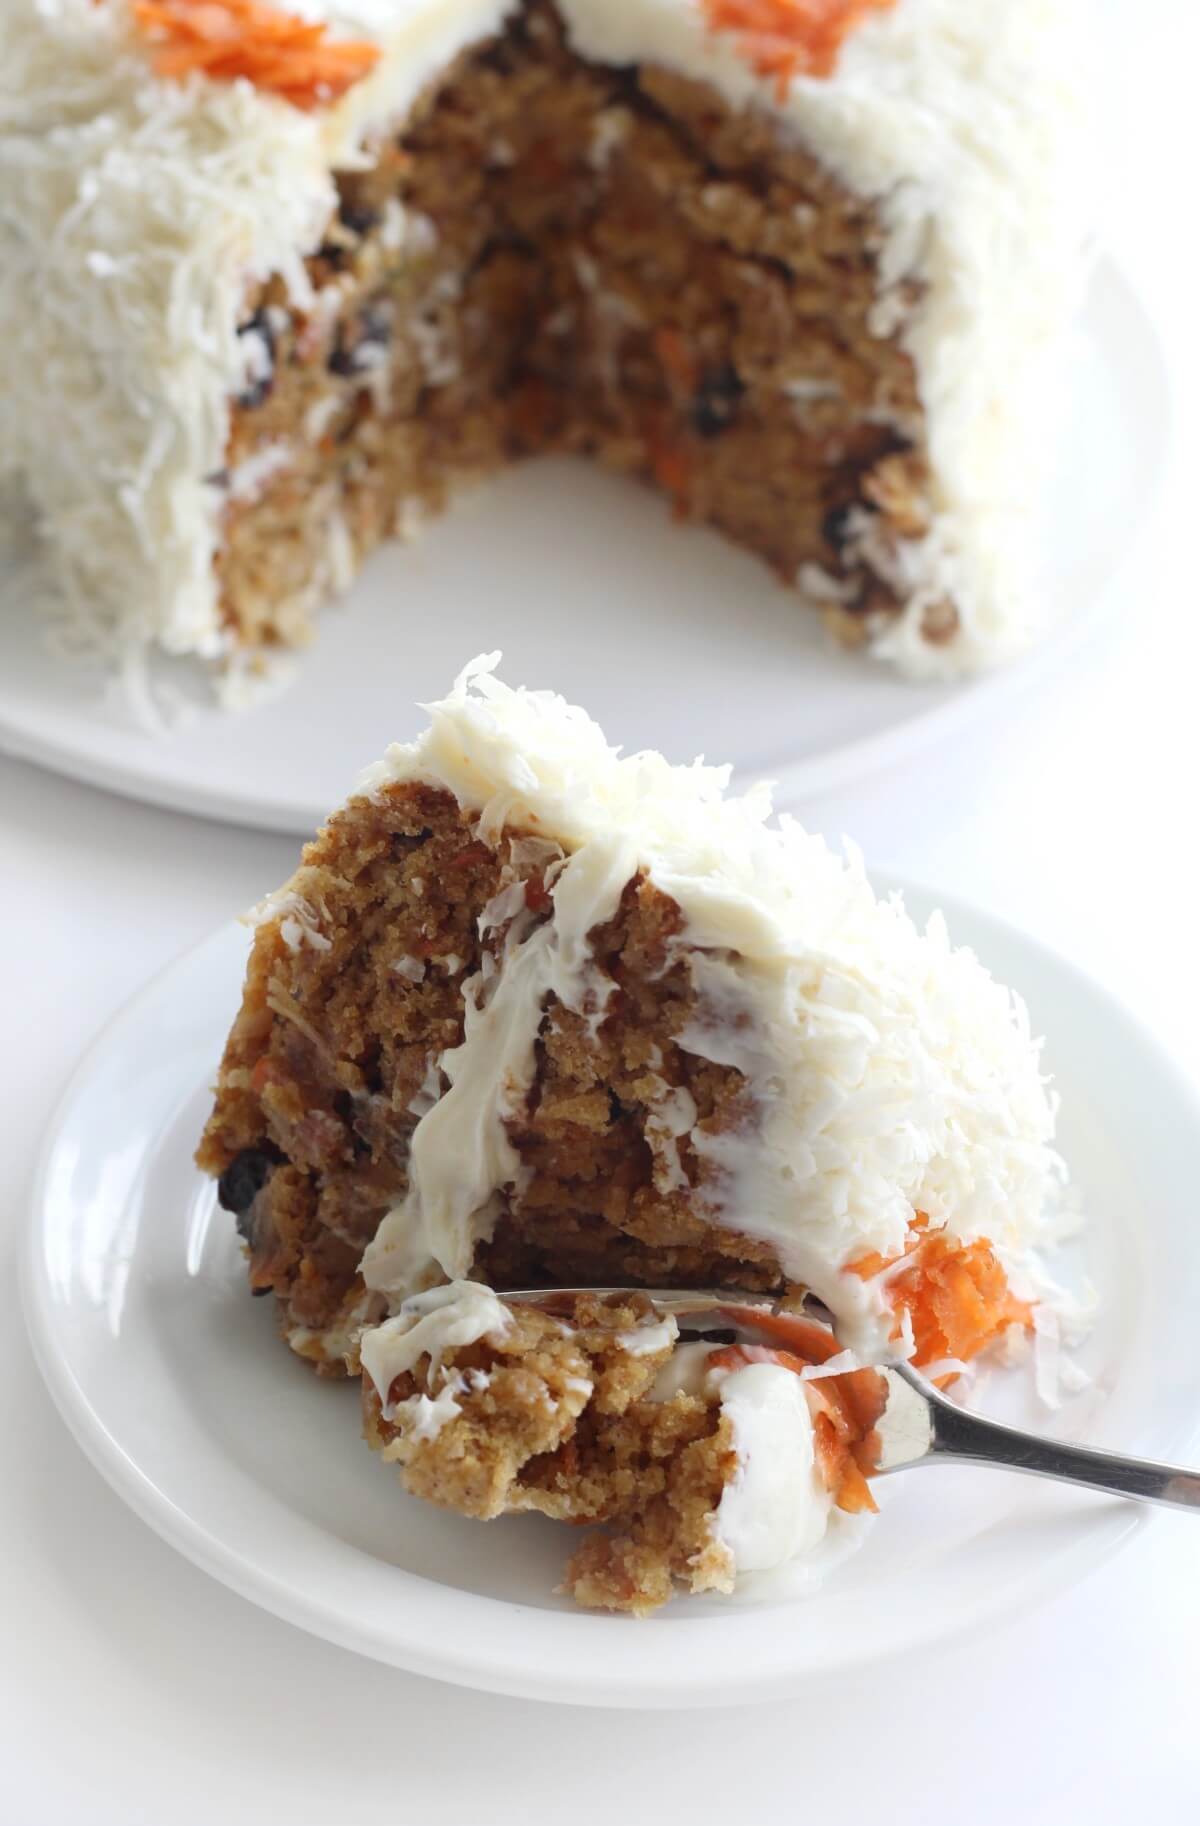 gluten-free vegan carrot cake with slice cut on plate with fork